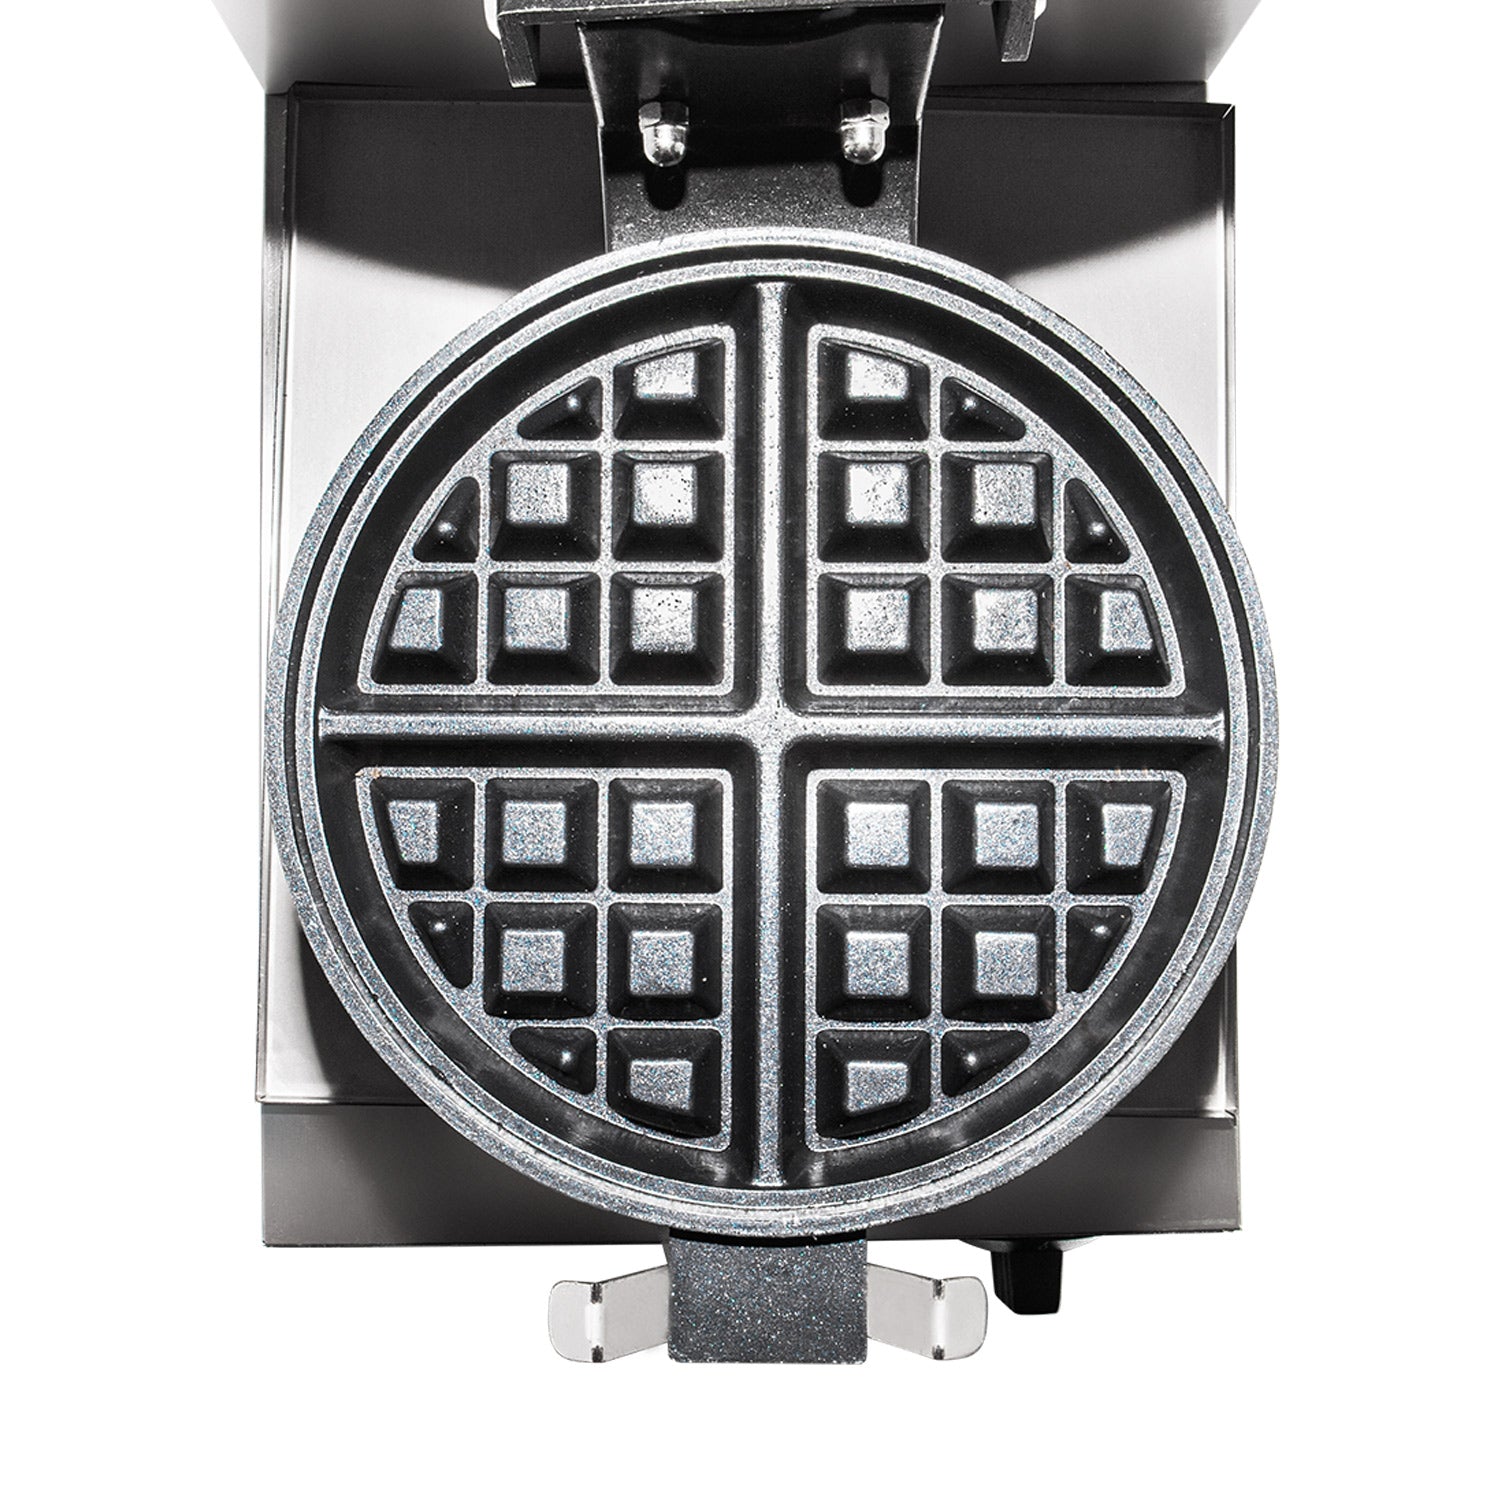 AR-HWB1A Double Double Waffle Maker | Round-Shaped Belgium Waffles | Stainless Steel | Nonstick Coating